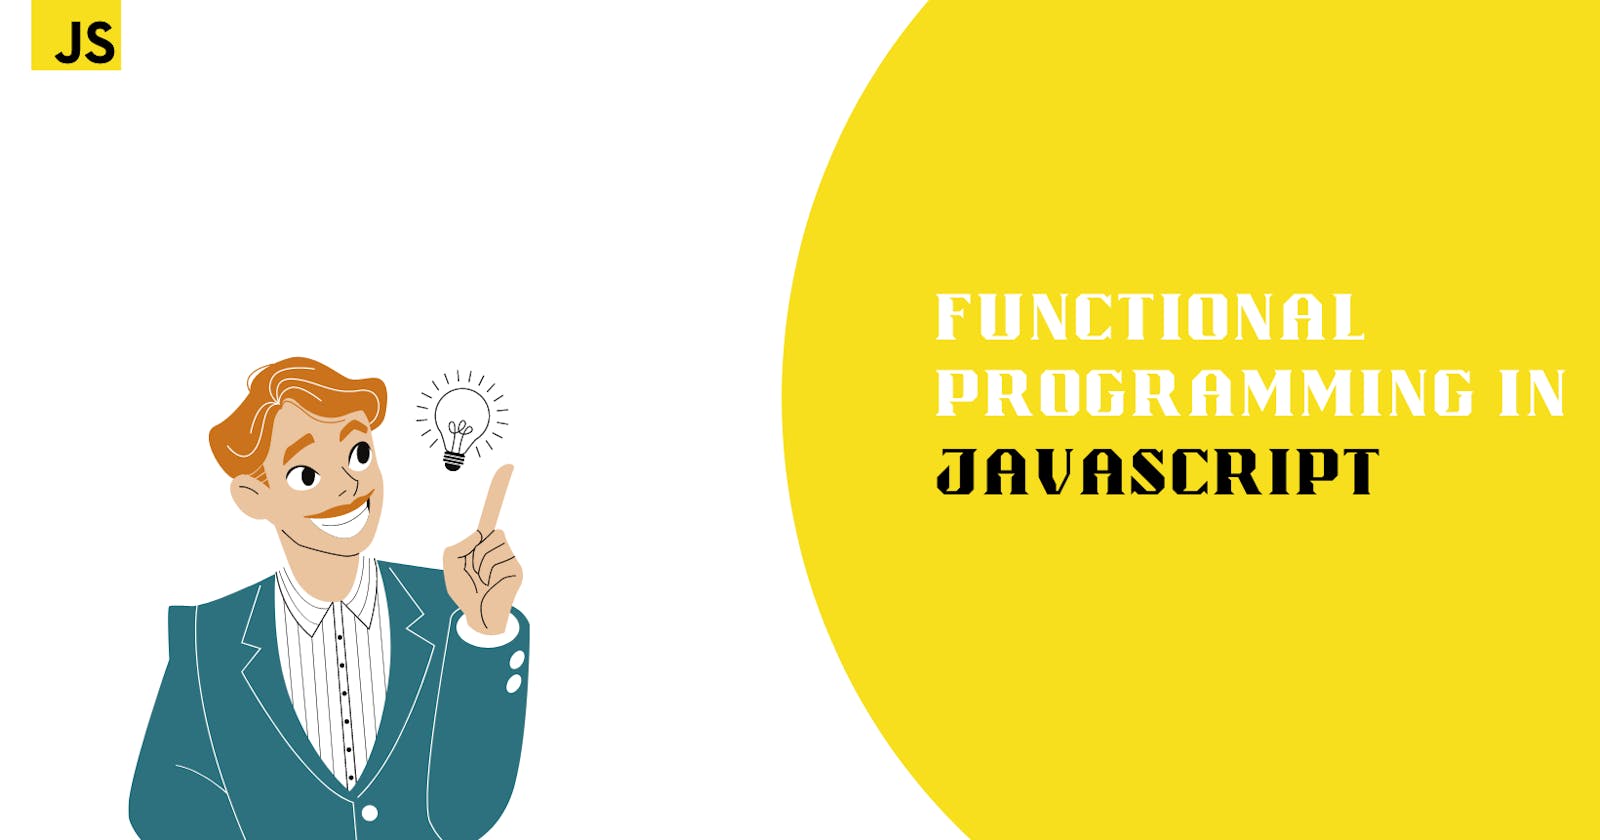 Introduction to Functional Programming in JavaScript.